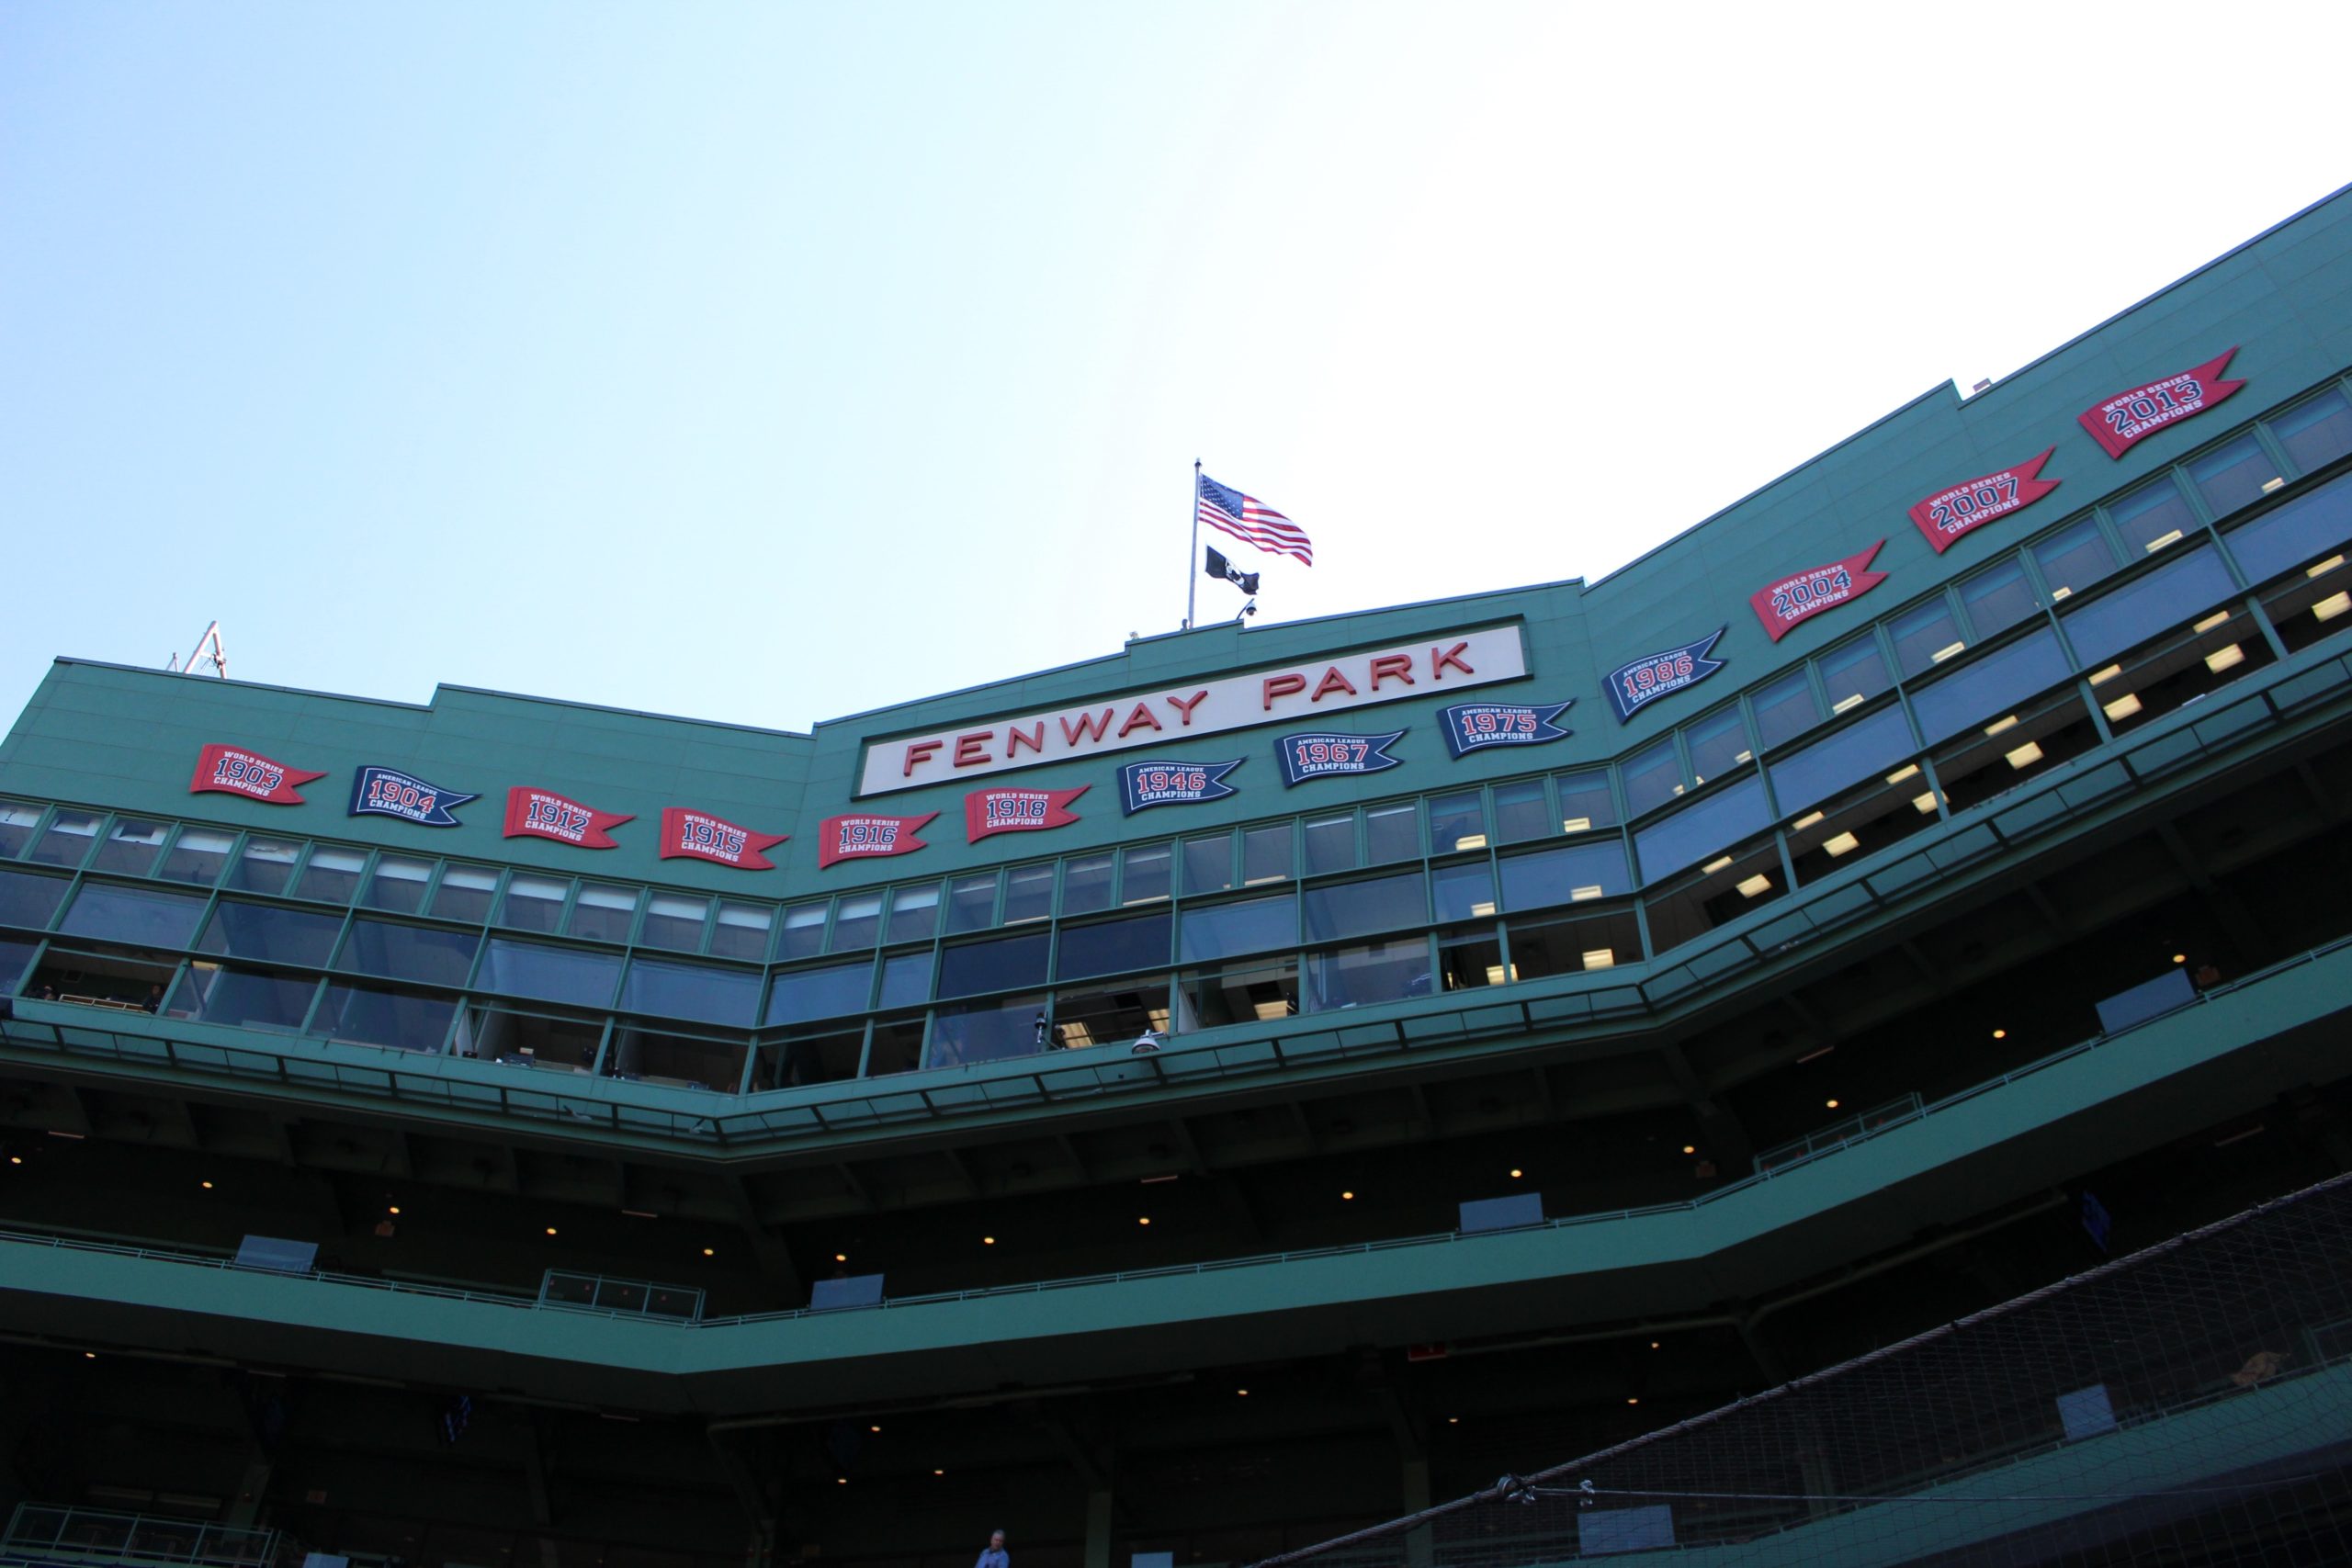 Fenway Park baseball stadium makes for a great activity when spending a weekend in Boston. 